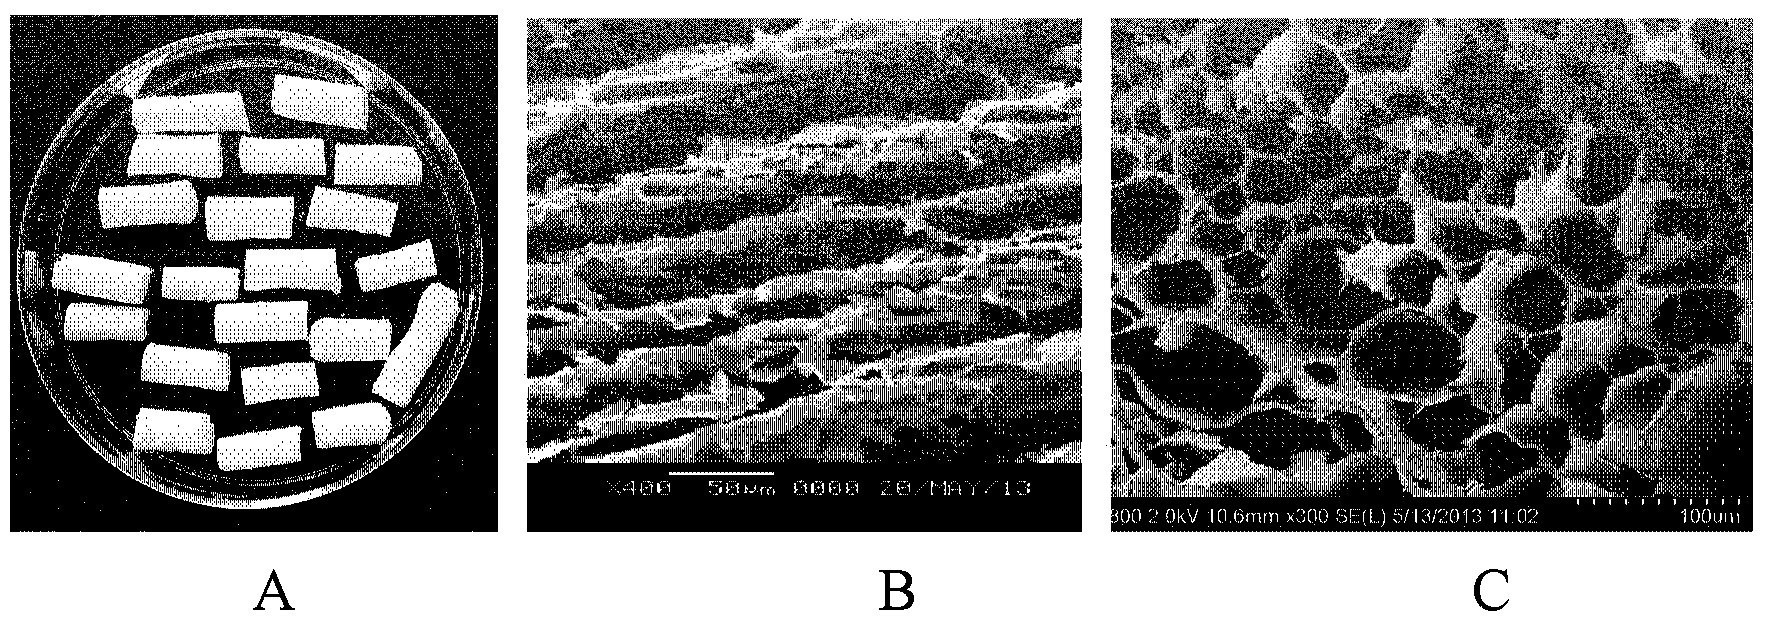 Hyaluronic acid-orientated channel composite bracket material used for spinal cord injury repair